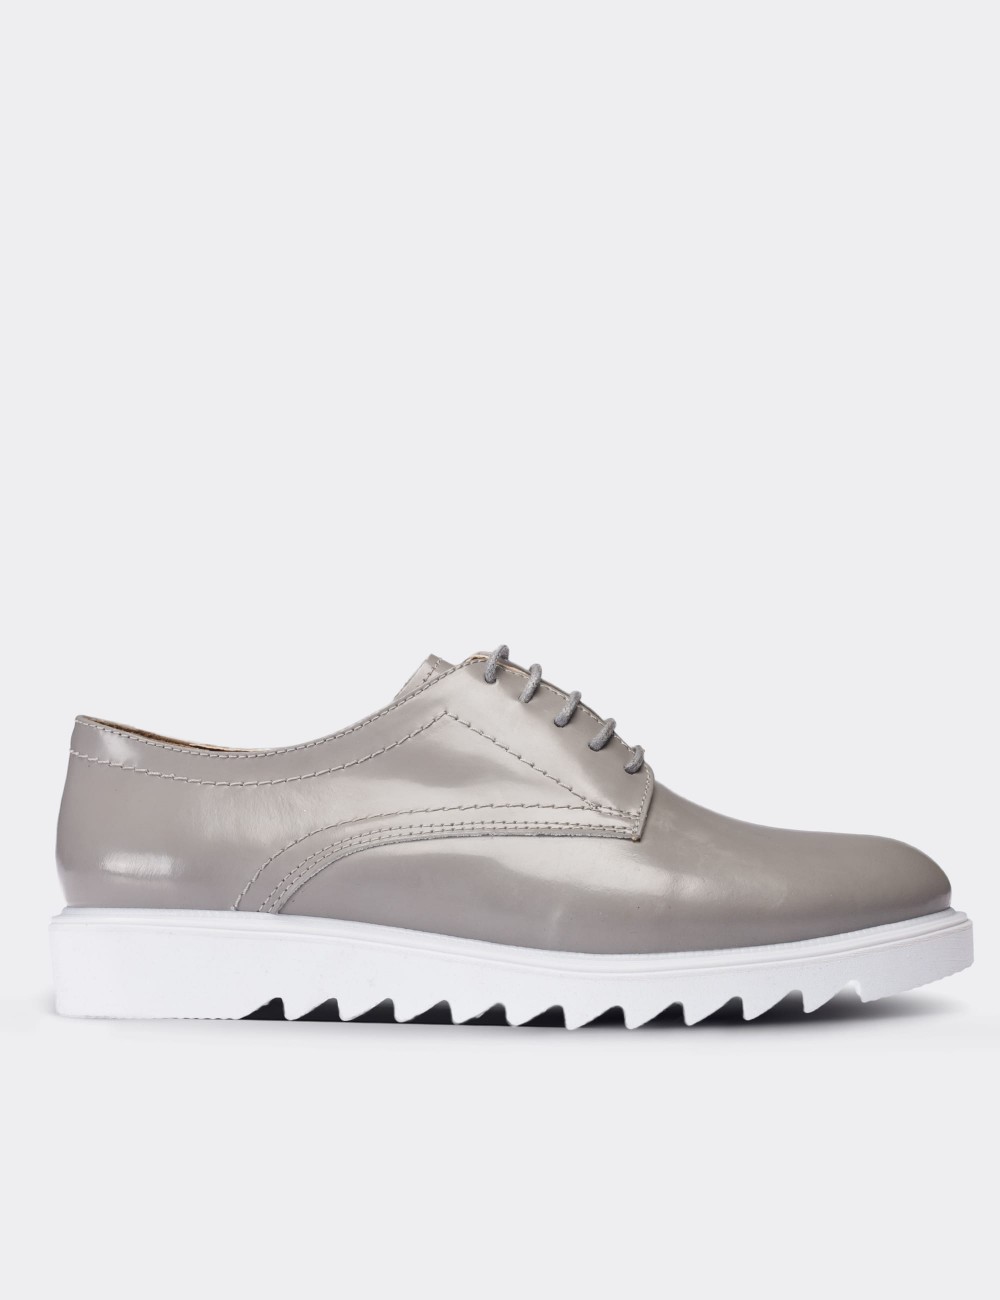 Gray Patent Leather Lace-up Oxford Shoes - 01430ZGRIE03